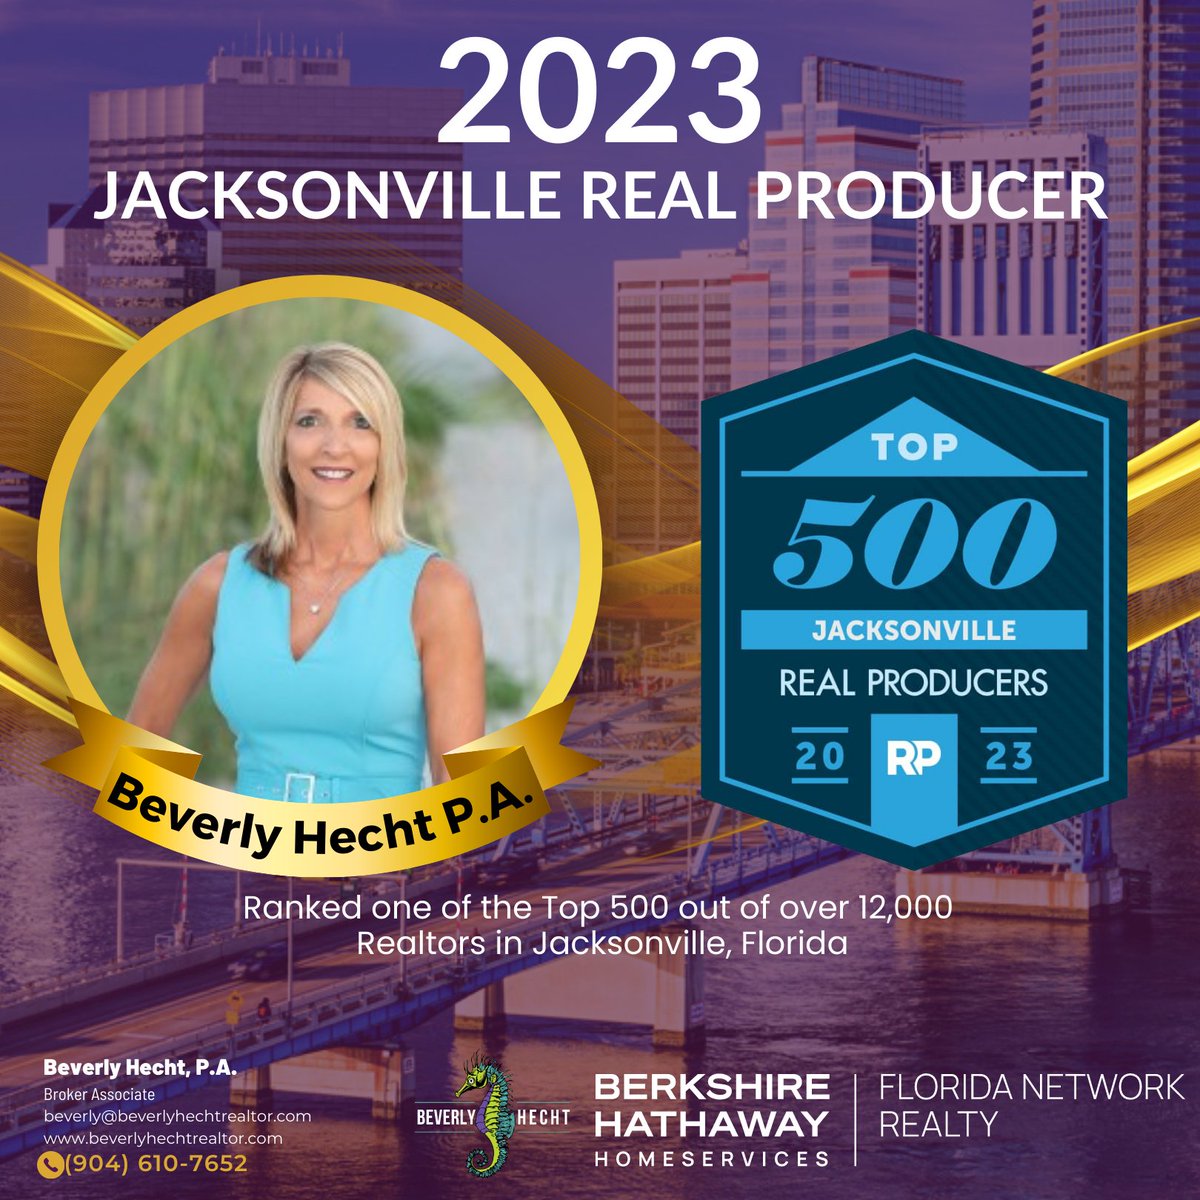 I am so very grateful for my incredible clients who made this recognition possible.  Your trust, support & loyalty is appreciated more than you know!  Thank you so very much!!  💕🙏🏡

Beverly

#homeselling #homebuying #homeforsale #homelisting #realestate #JacksonvilleRealestate